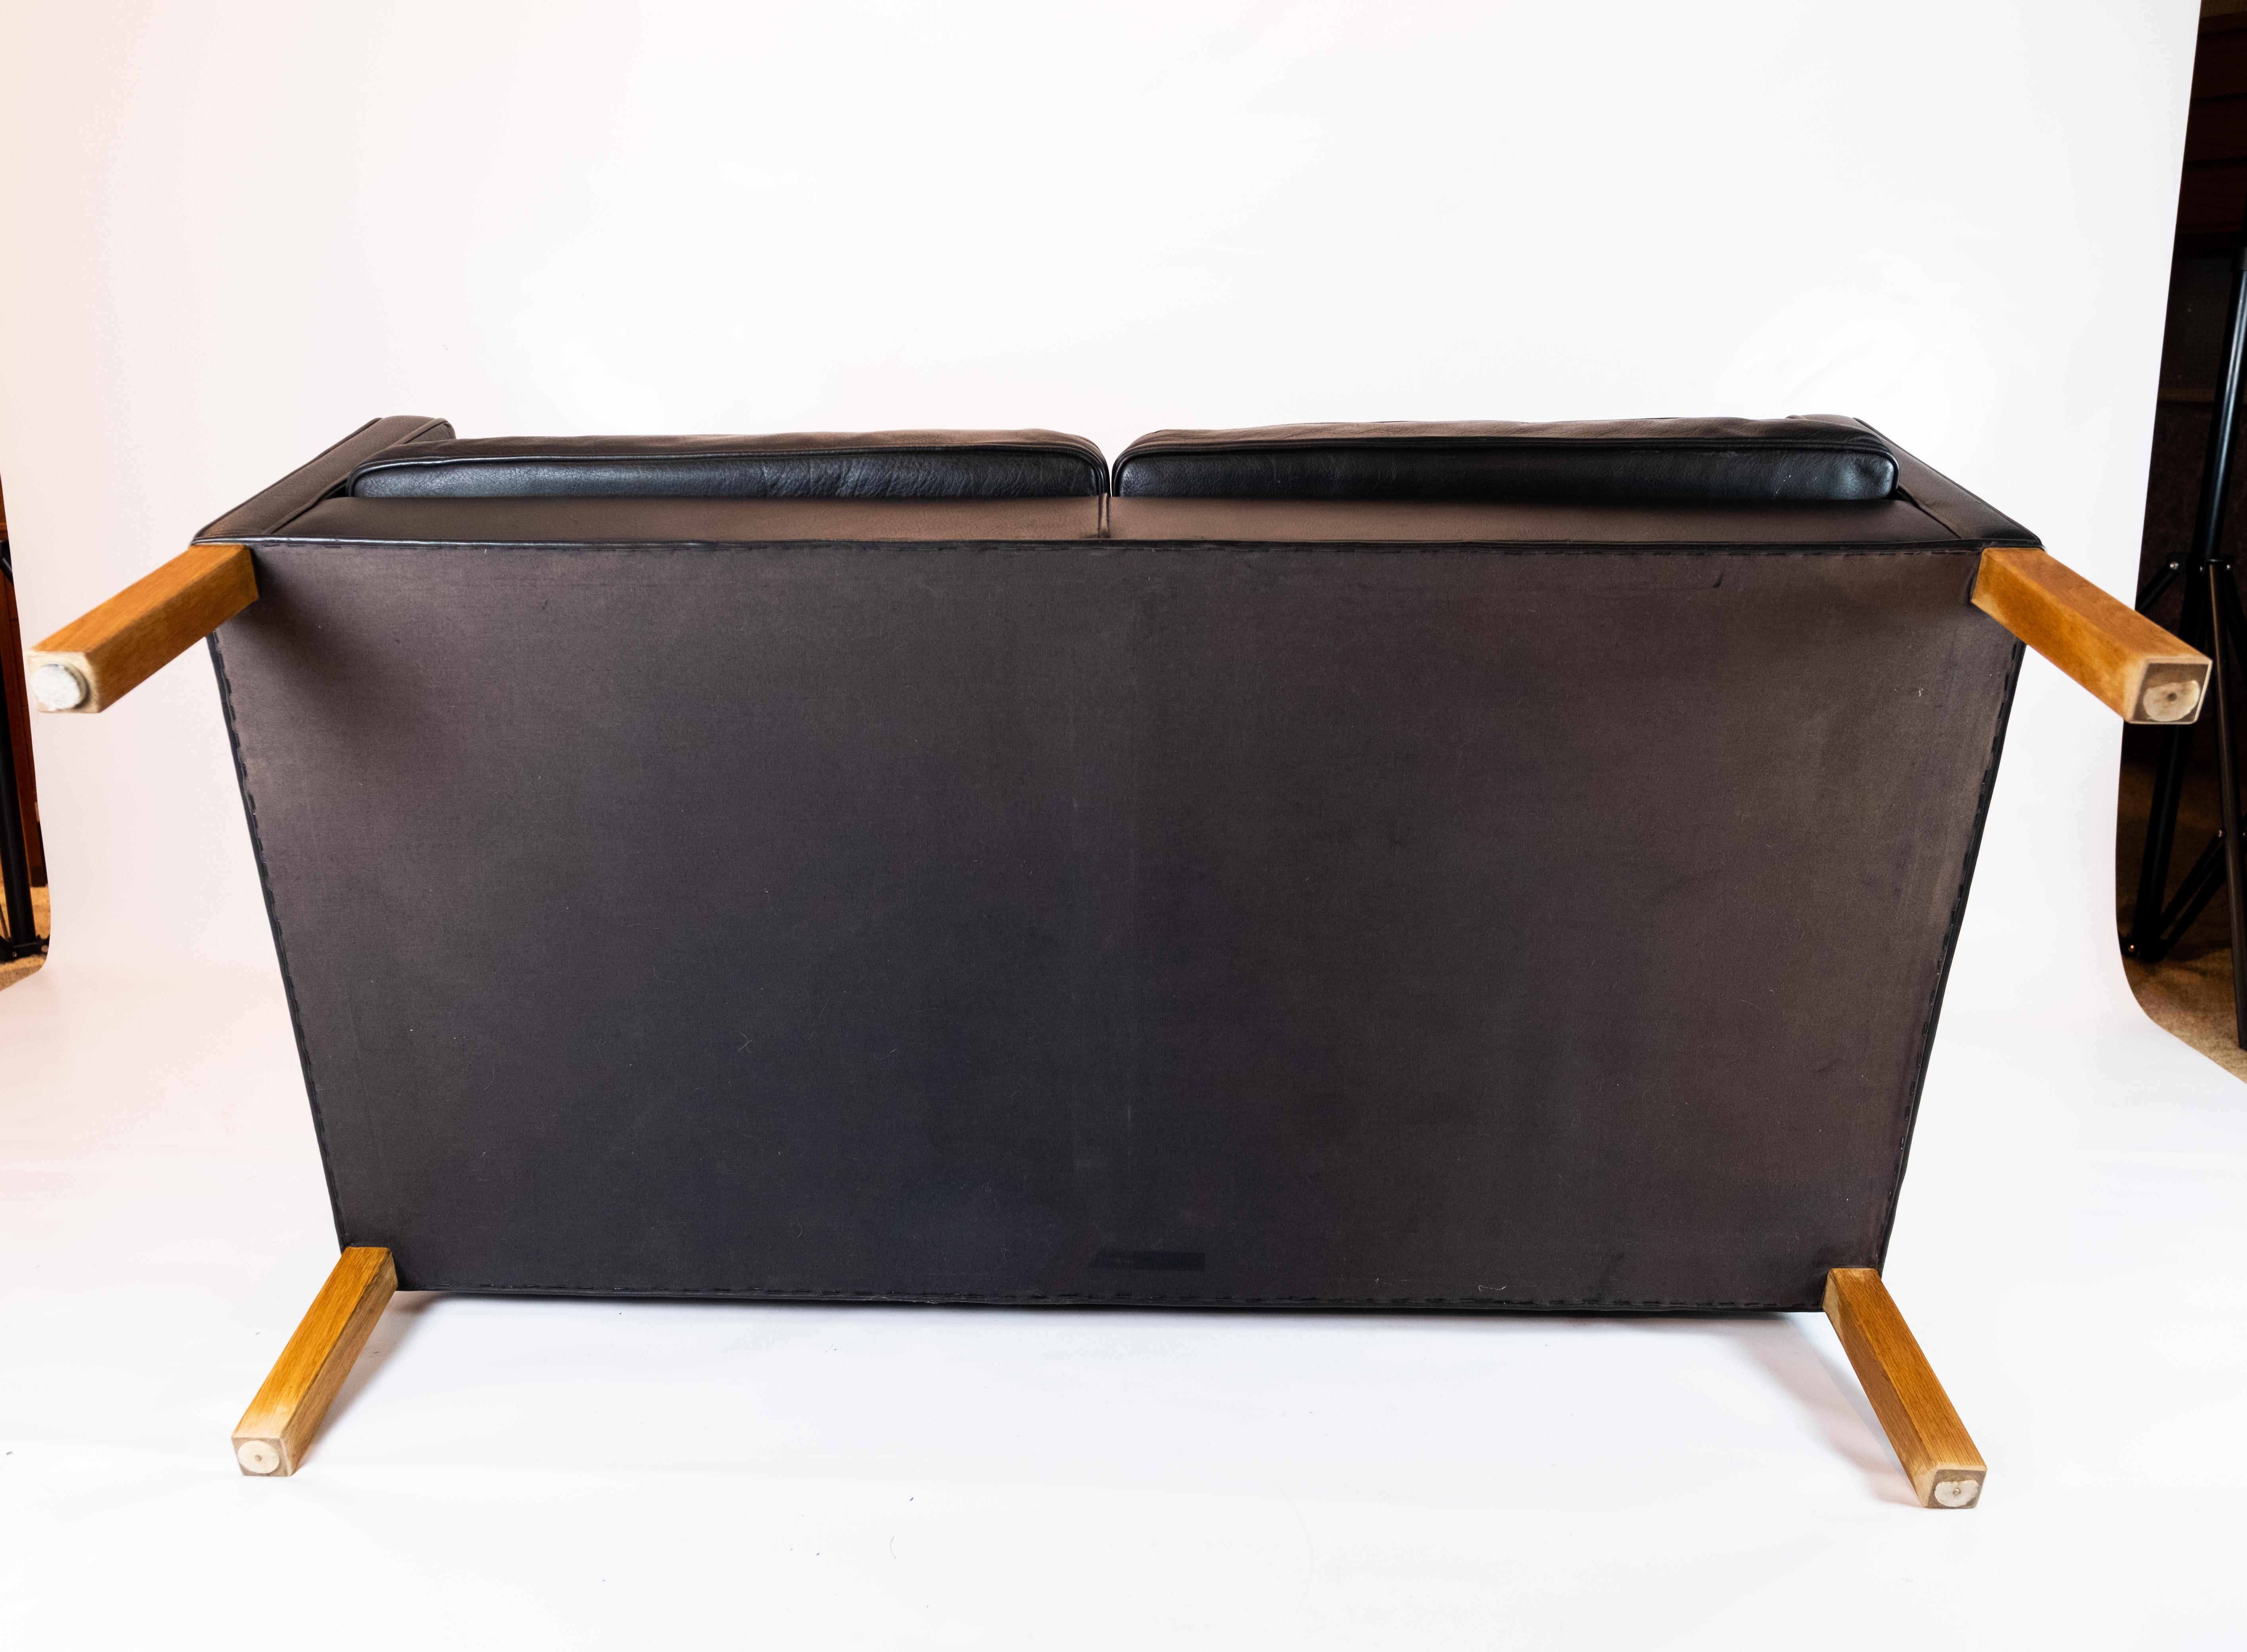 Kupe 2-Seat Sofa Model 2192 Made In Black Leather By Børge Mogensen From 1970s For Sale 1